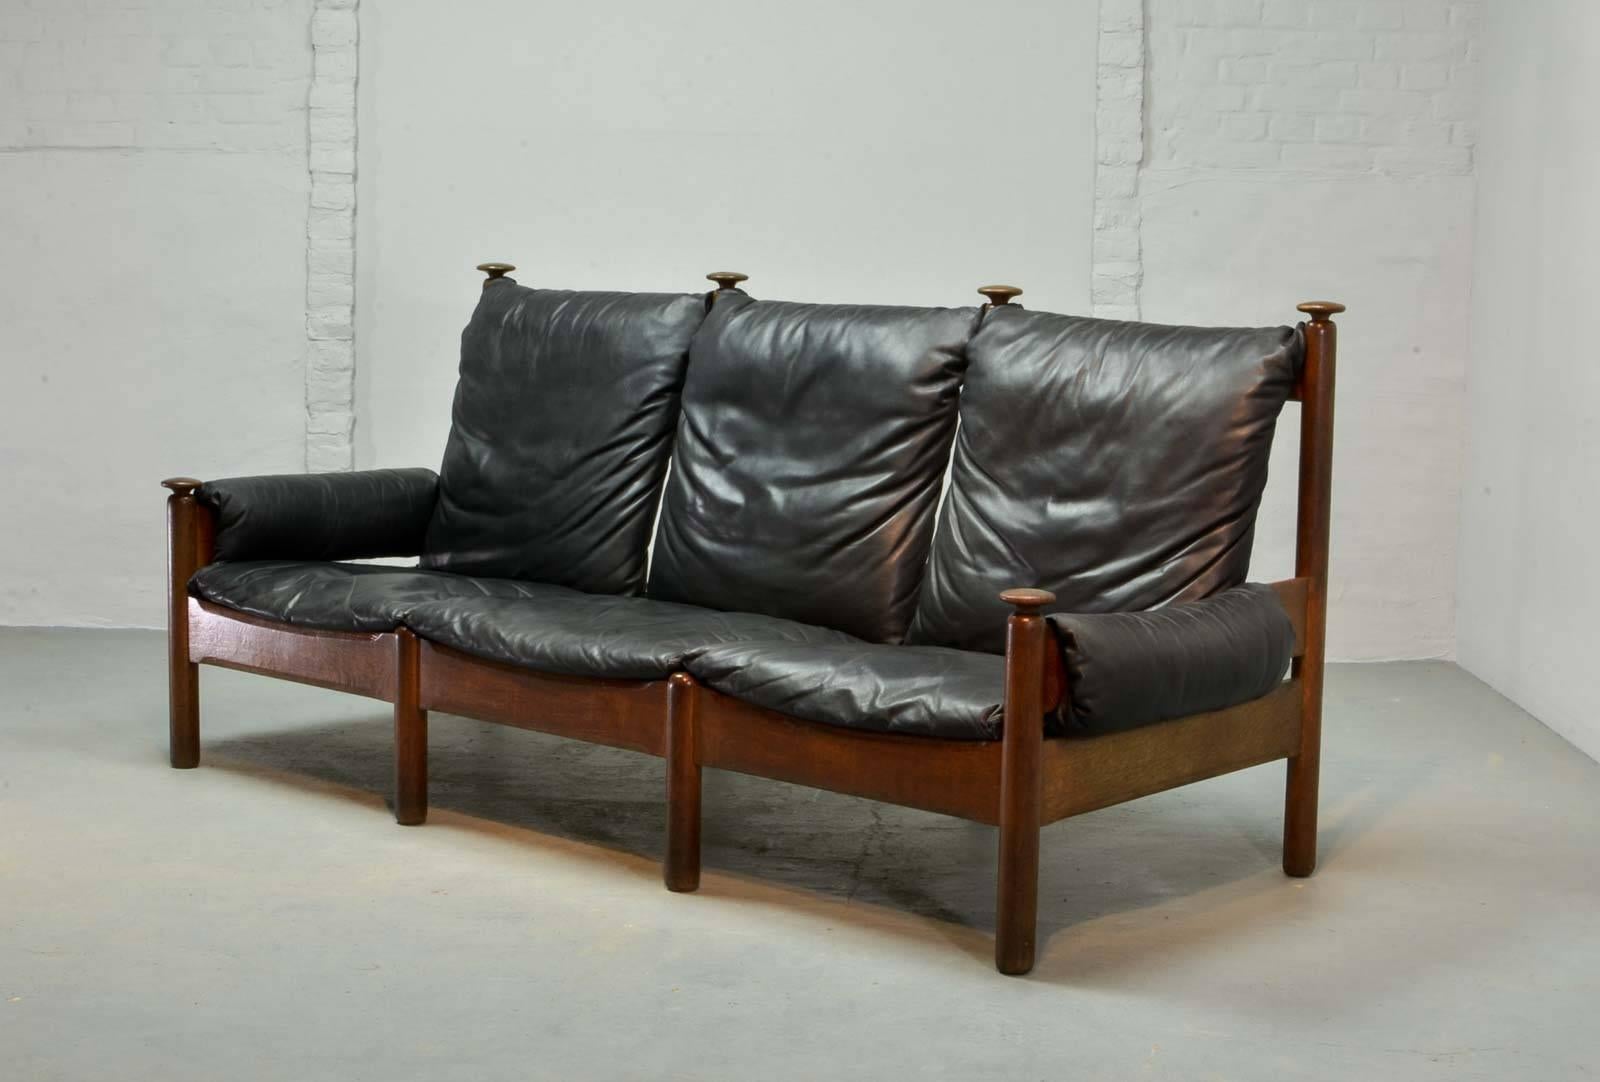 Sturdy midcentury soft black leather Scandinavian sofa produced in the 1960s in style of the Danish designer Arne Norell. The sofa features an oak wooden base with knobs and black leather upholstery which is in an overall good condition. Two lounge